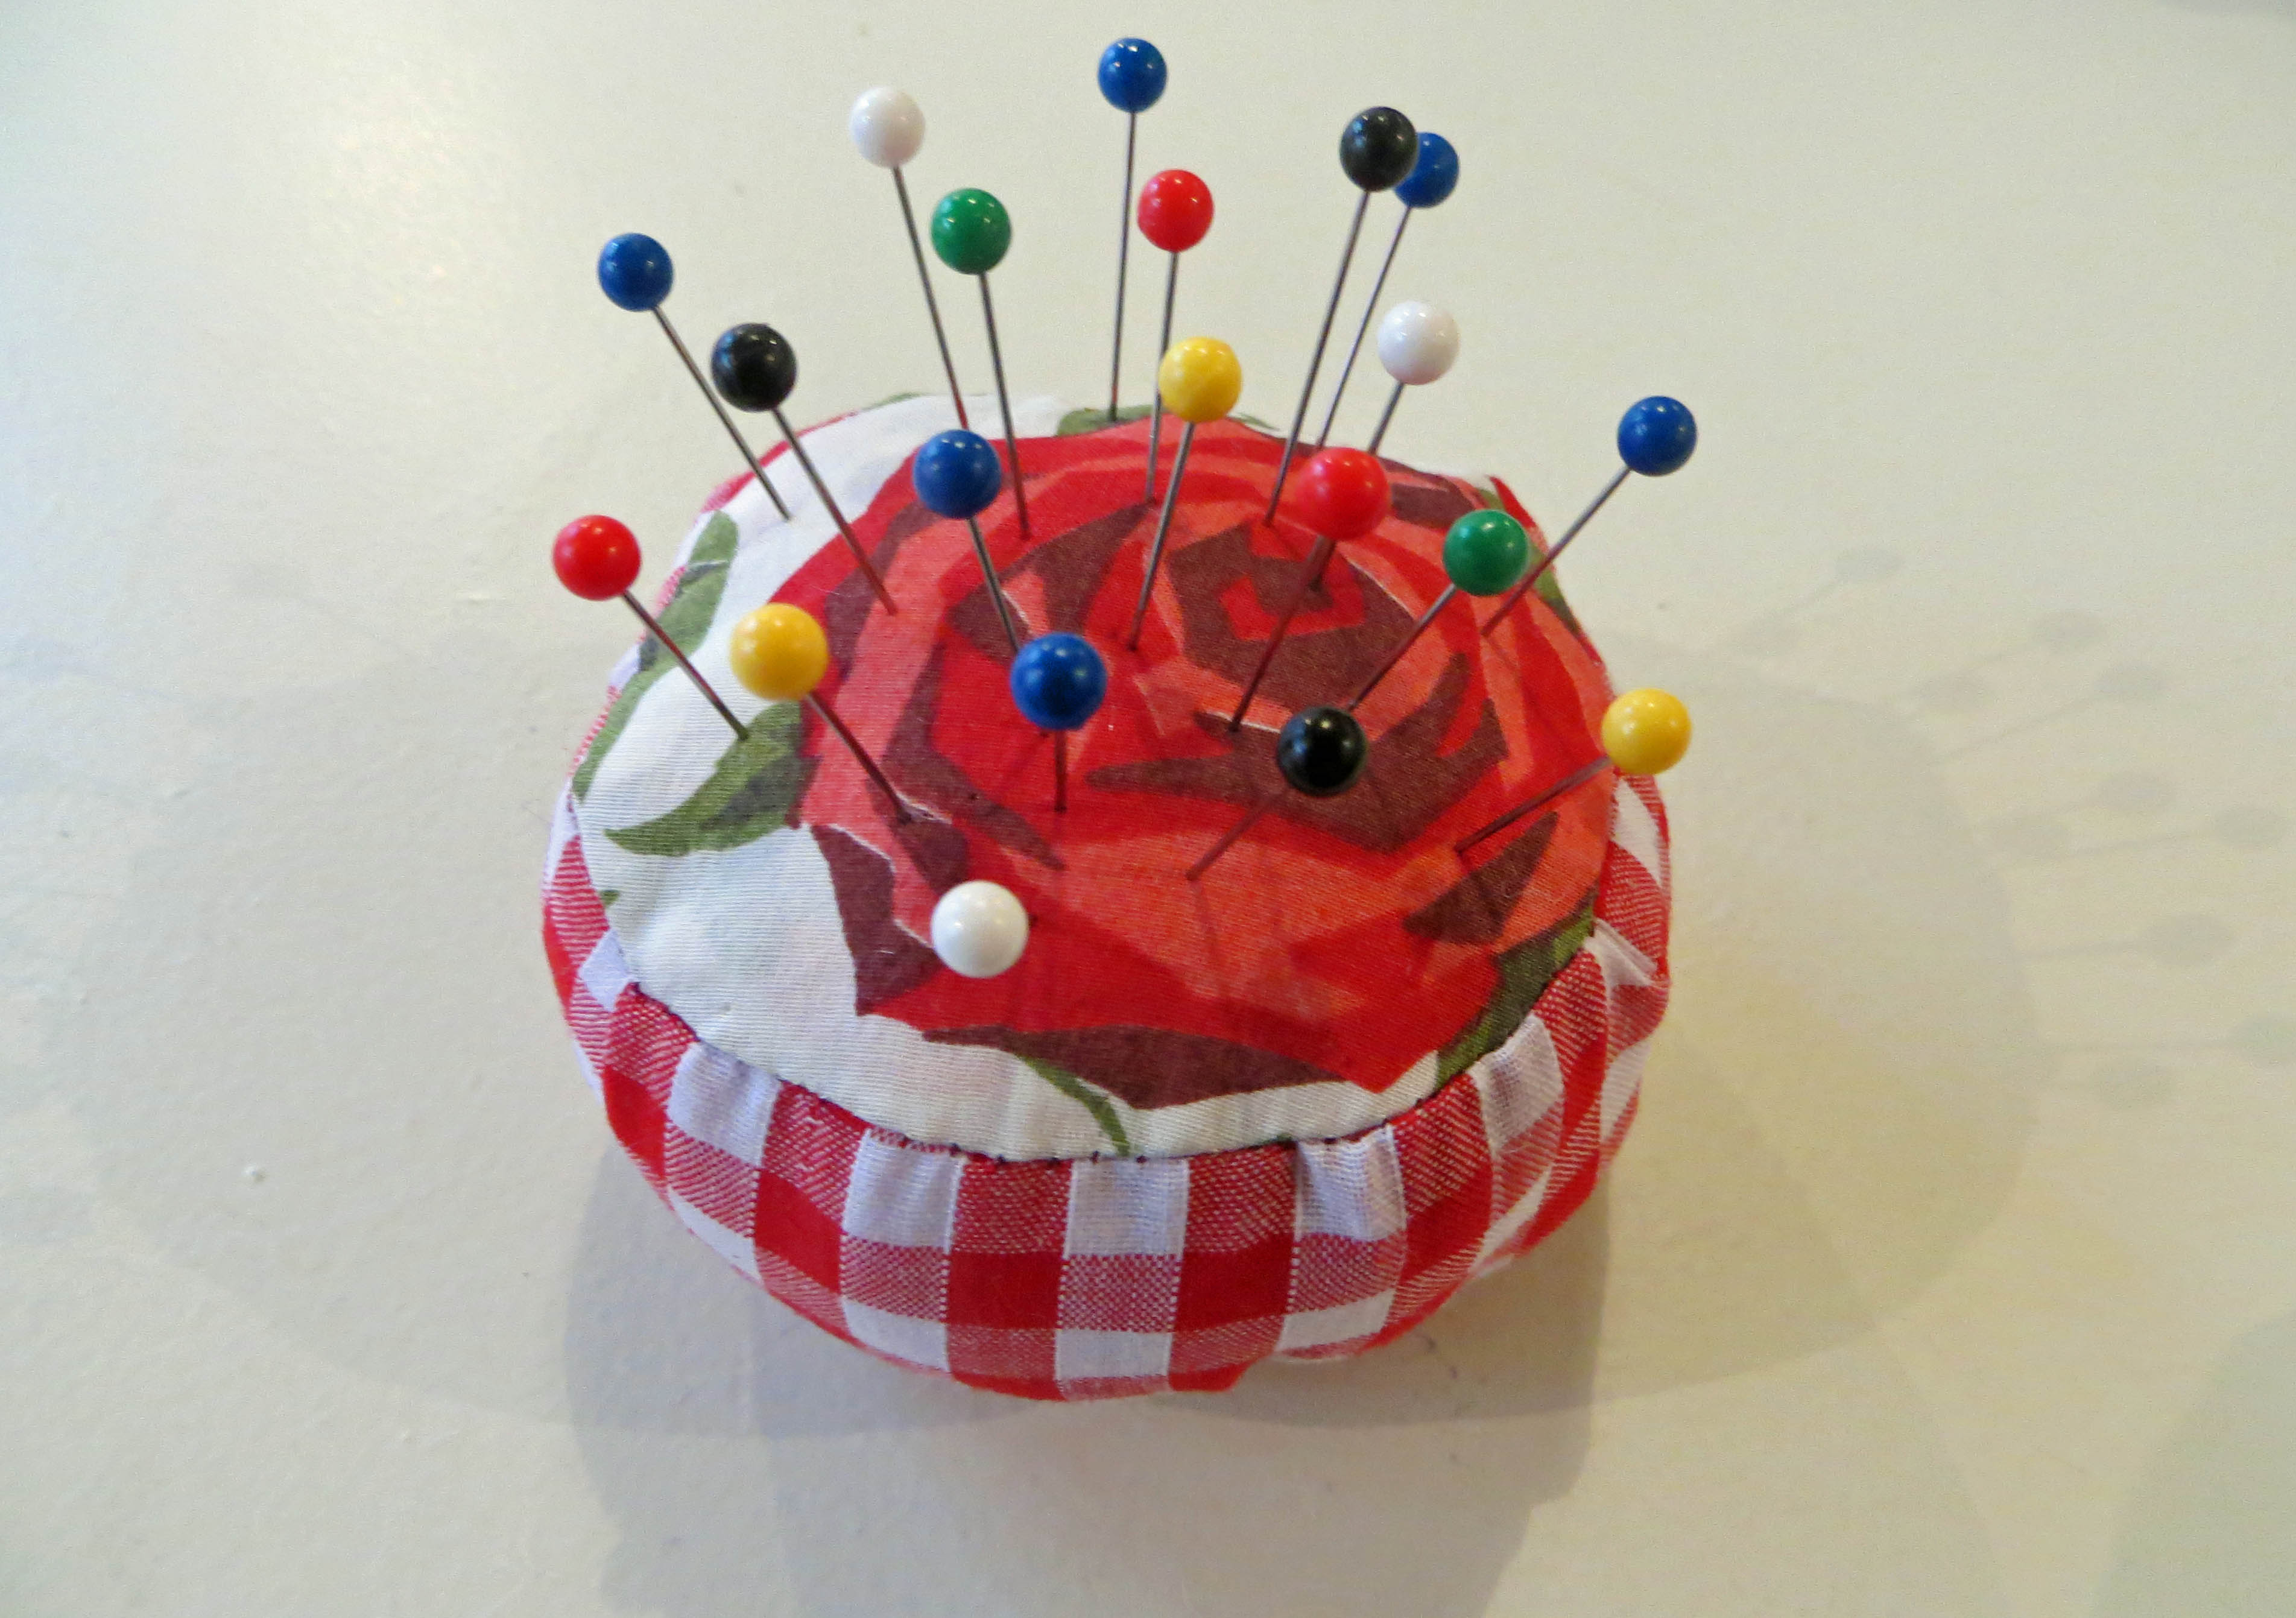 Pin cushion, a simple sewing project and essential for your sewing